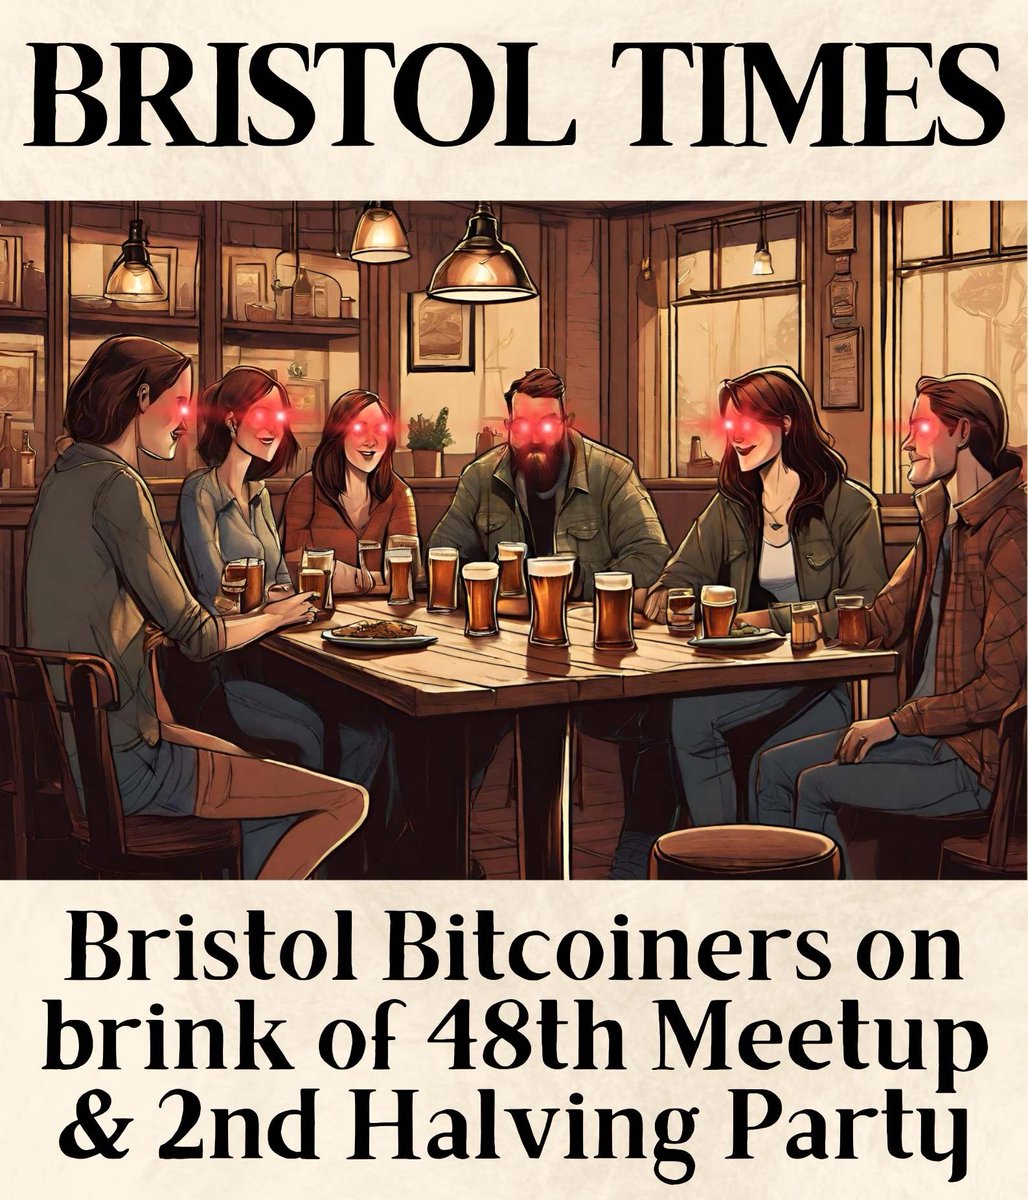 Come celebrate the #Bitcoin Halving in Bristol with us - this Saturday, April 20th from 6.15pm at @LHGBrewingco Brewpub. Very little organisation but plenty of fine plebs.